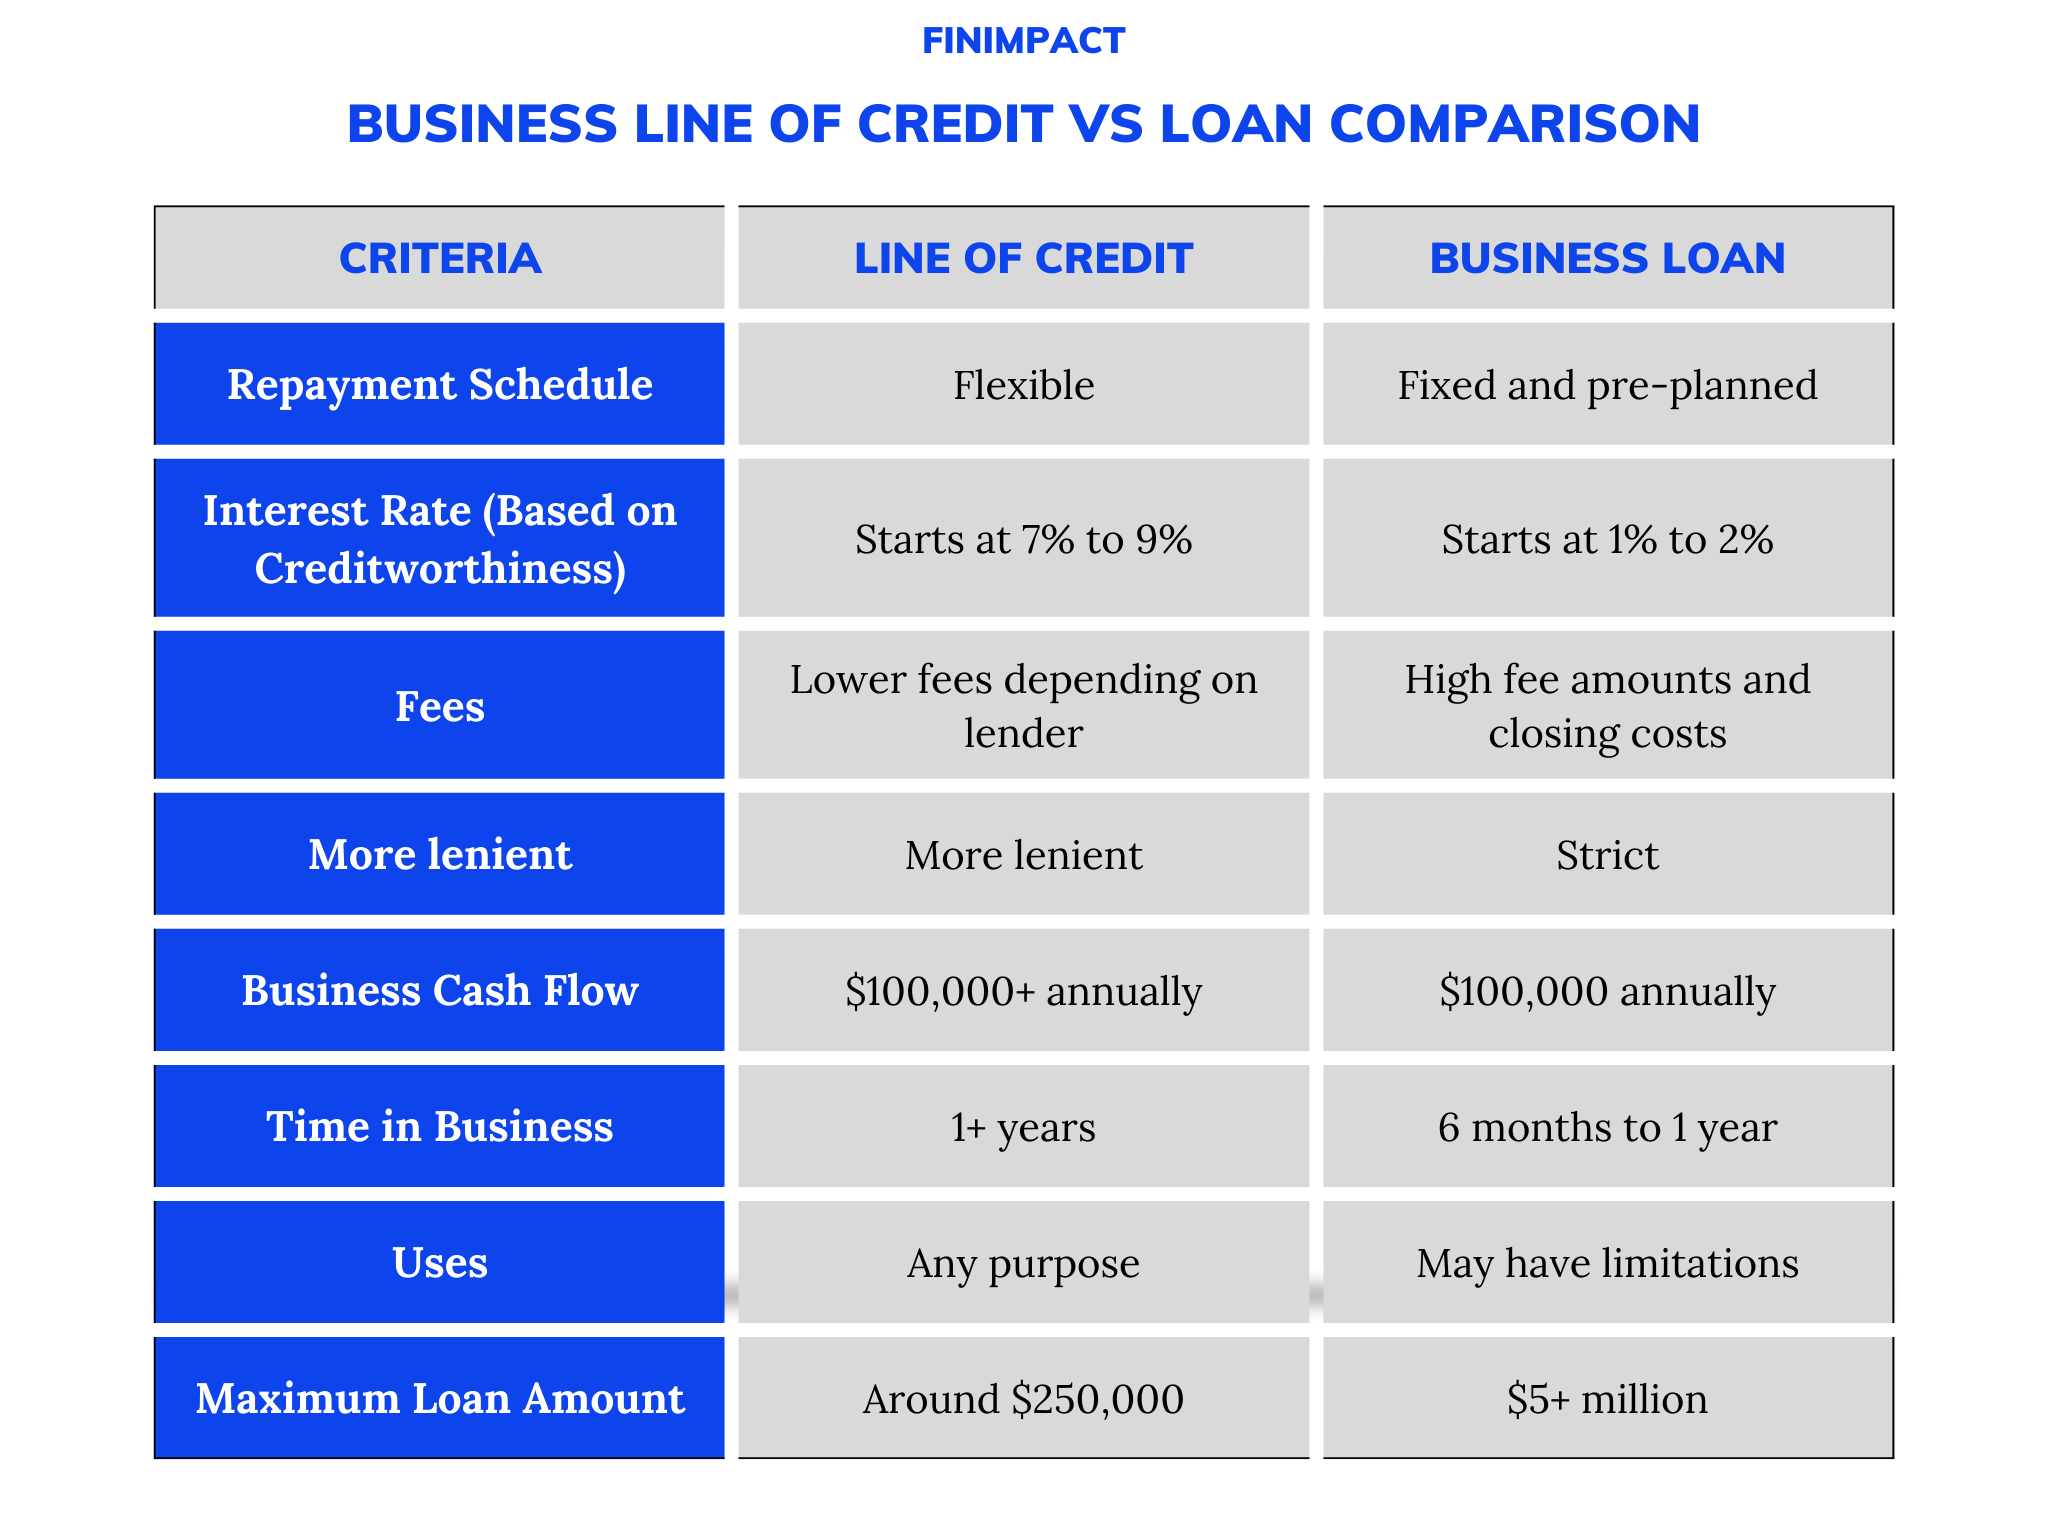 Business Line of Credit vs. Loan: Which One Is Cheaper?